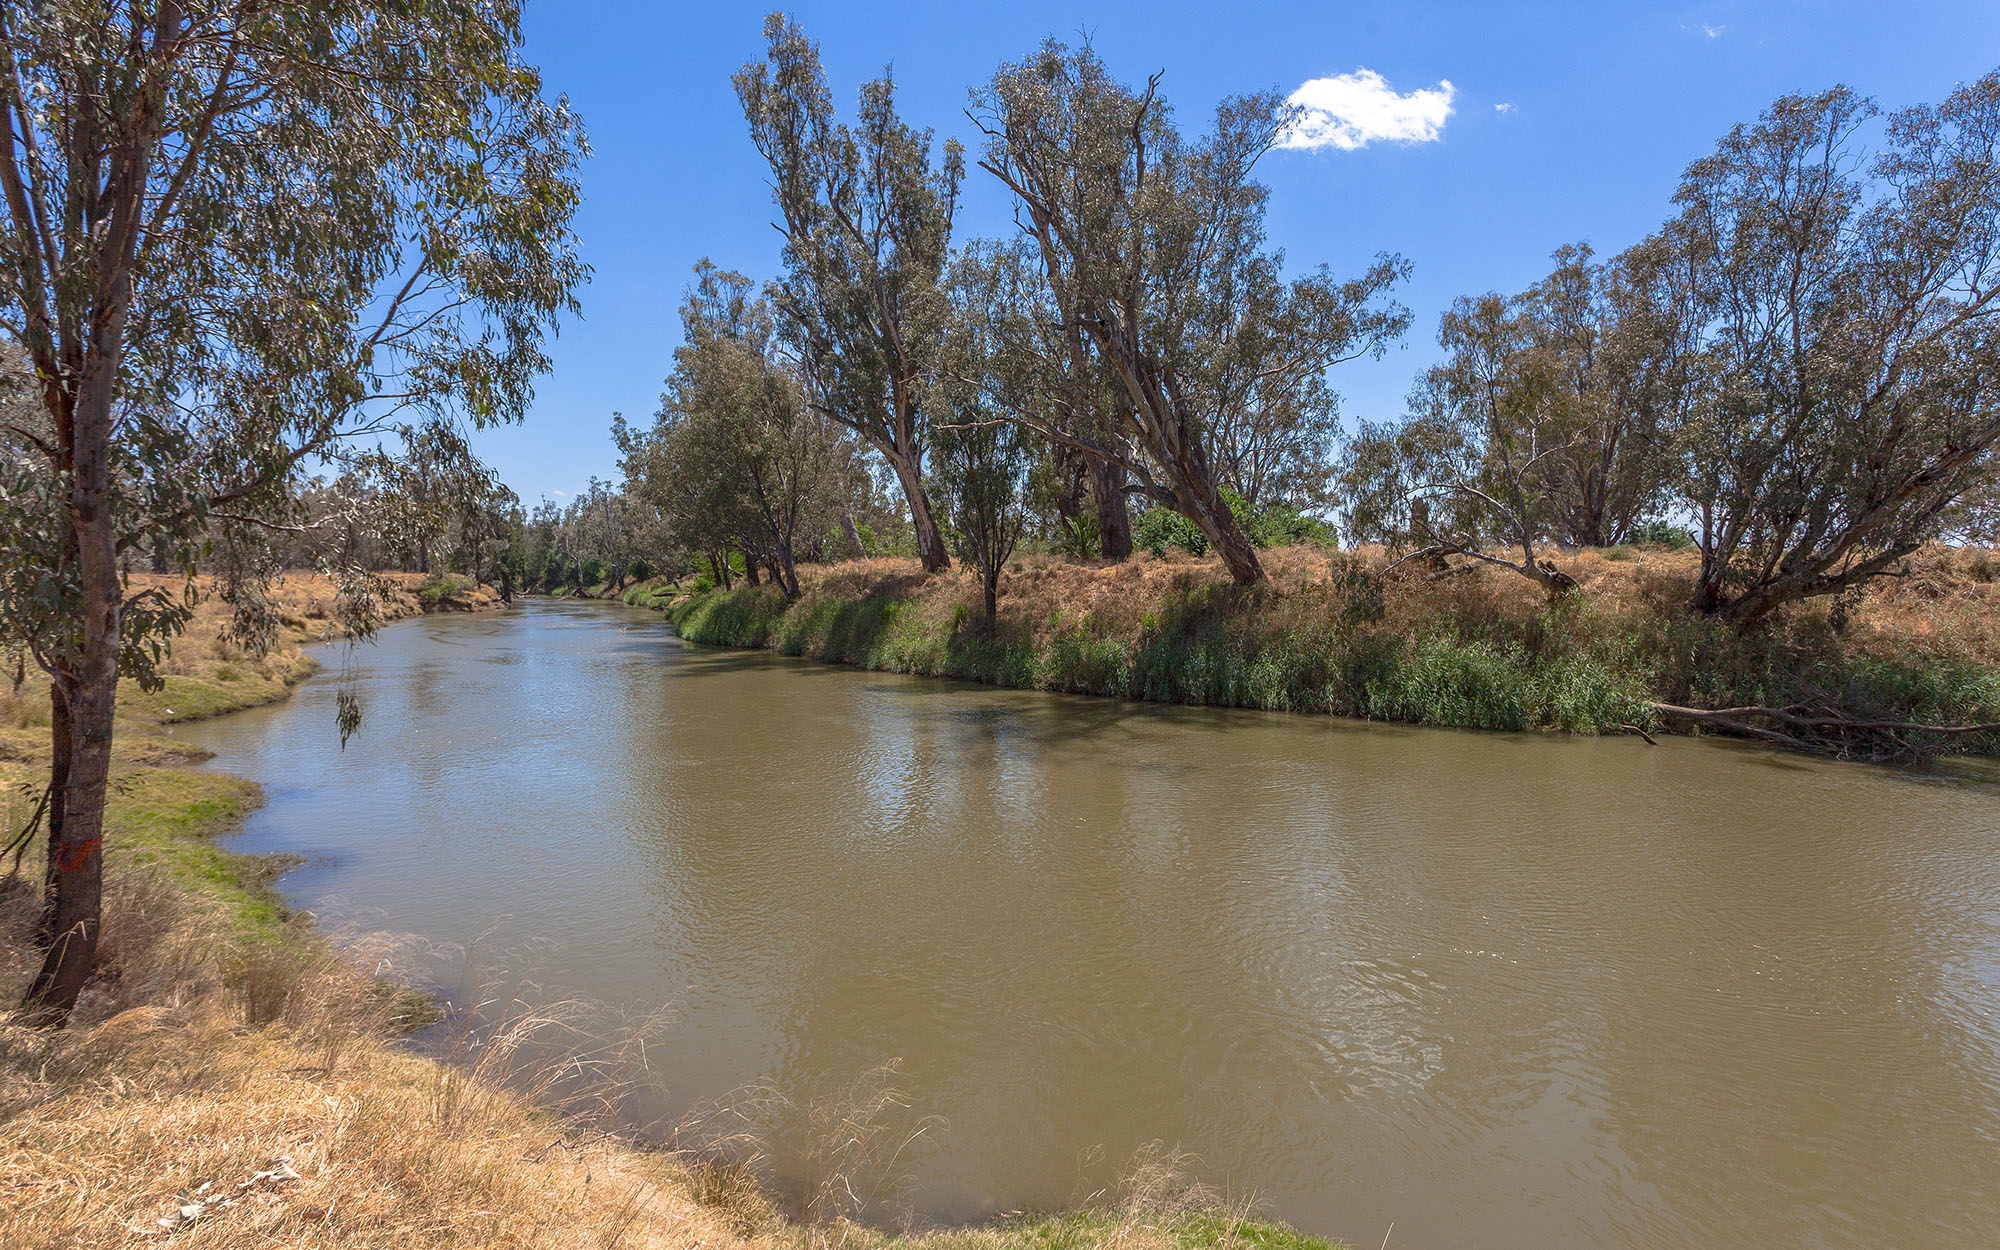 Namoi river in northern New South Wales, Australia.